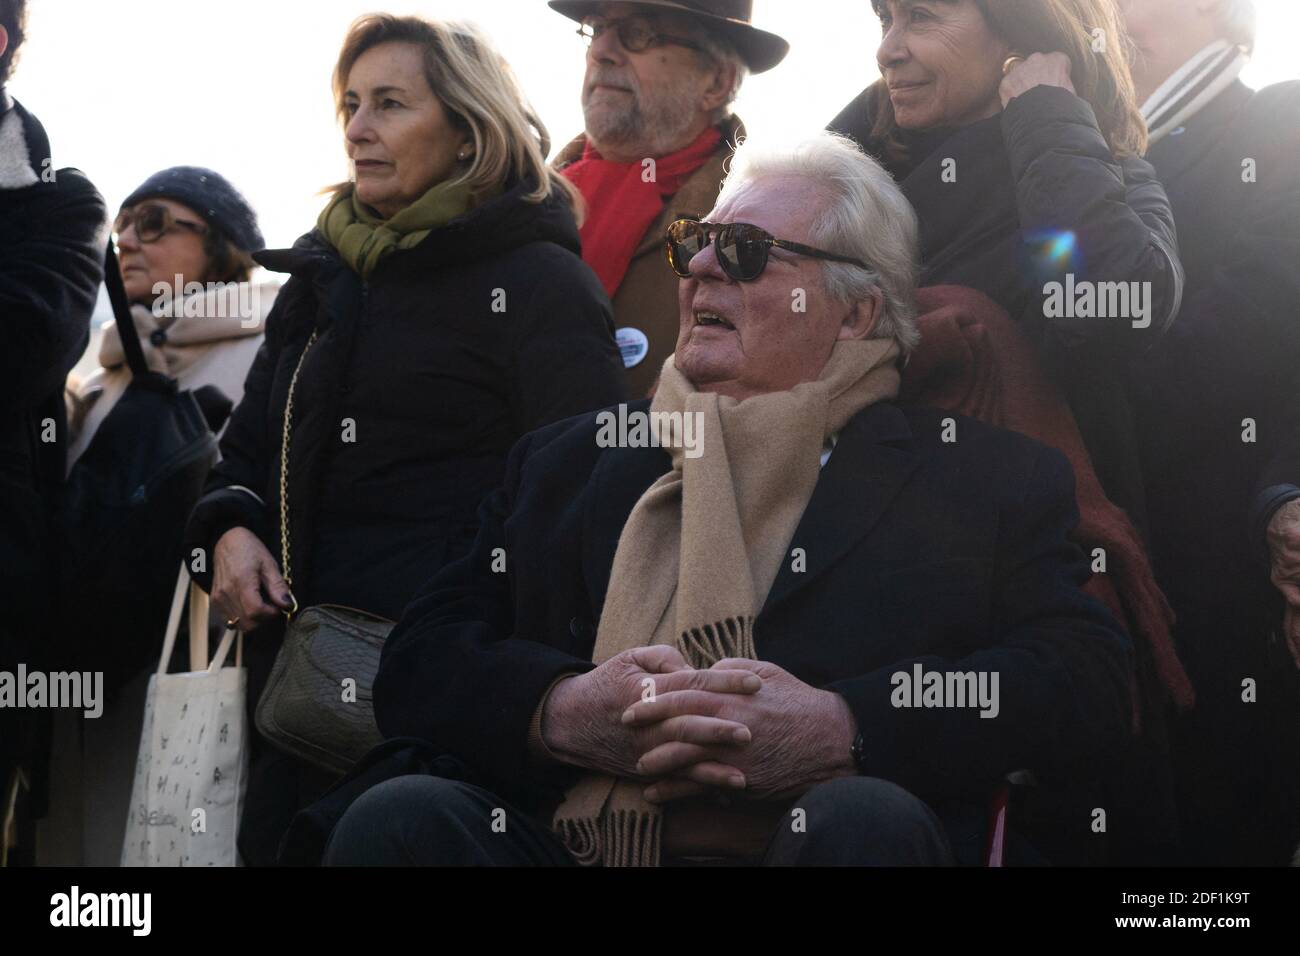 Jean-Jacques Sempé illustrator of the adventures of Little Nicholas attends the unveiling of a statue of Rene Goscinny in Paris, France on January 23, 2020. Photo by Florent Bardos/ABACAPRESS.COM Stock Photo